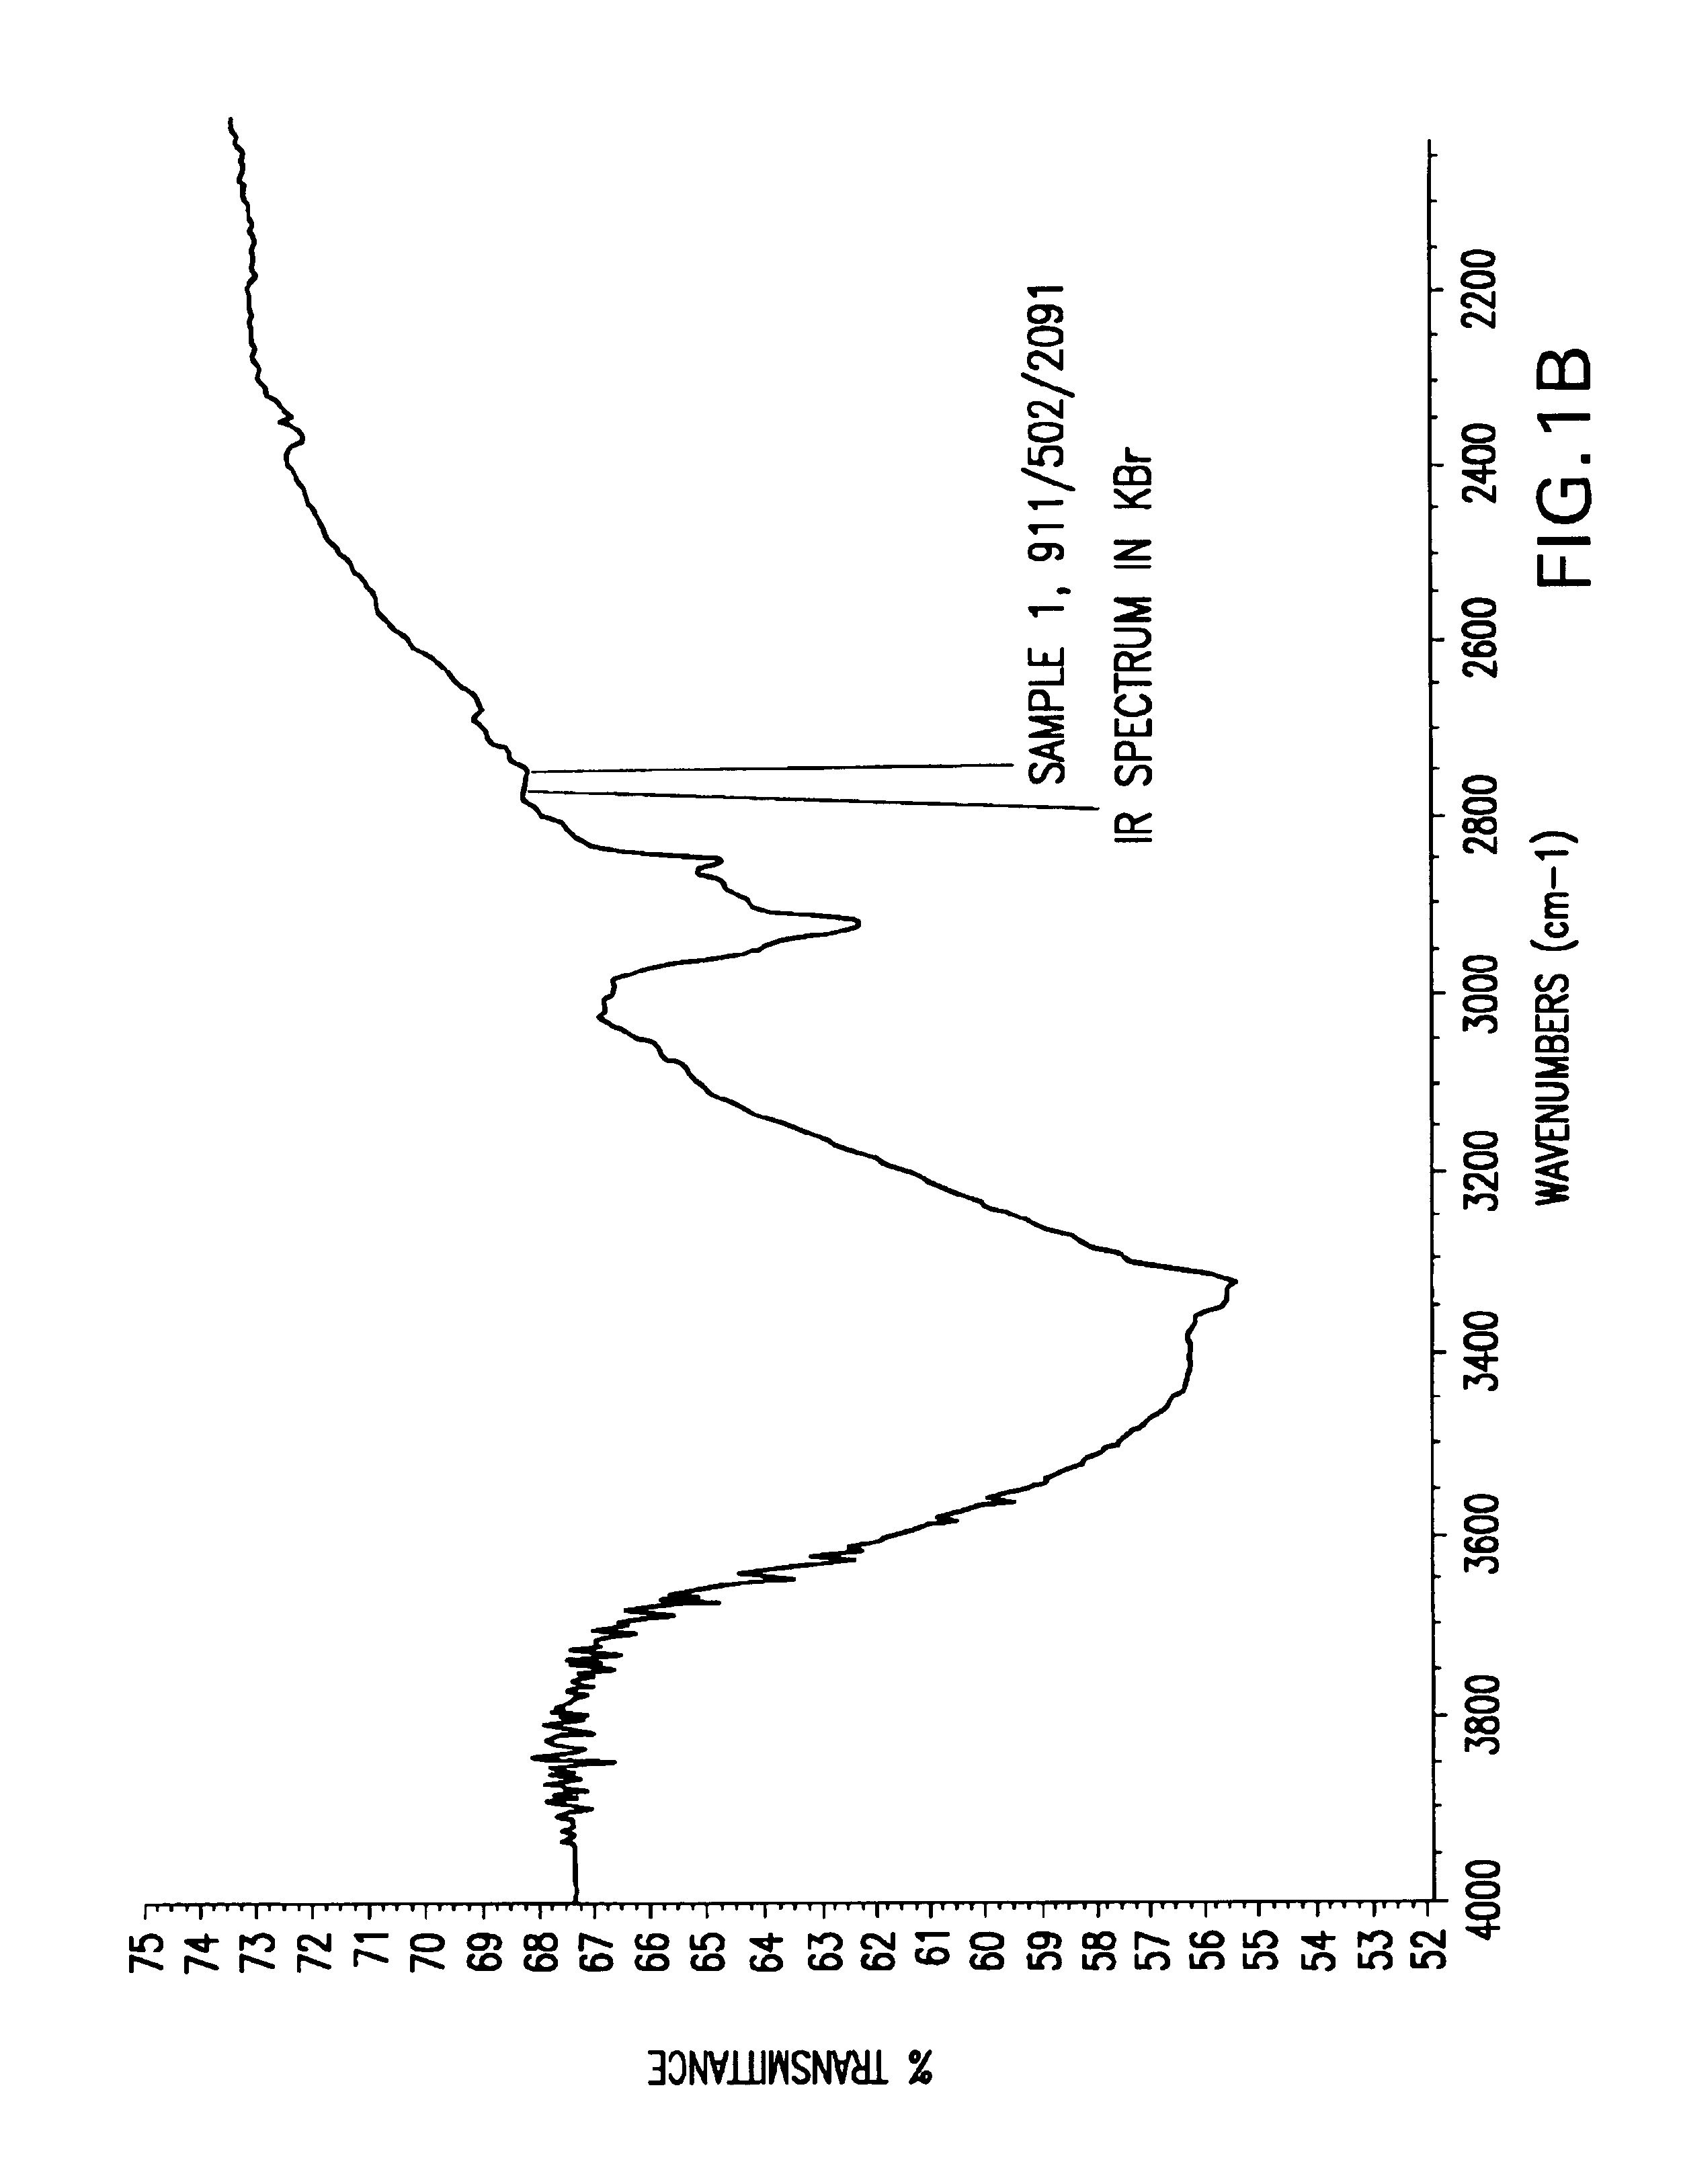 Agropolymer containing a carbohydrate and silica matrix from plants